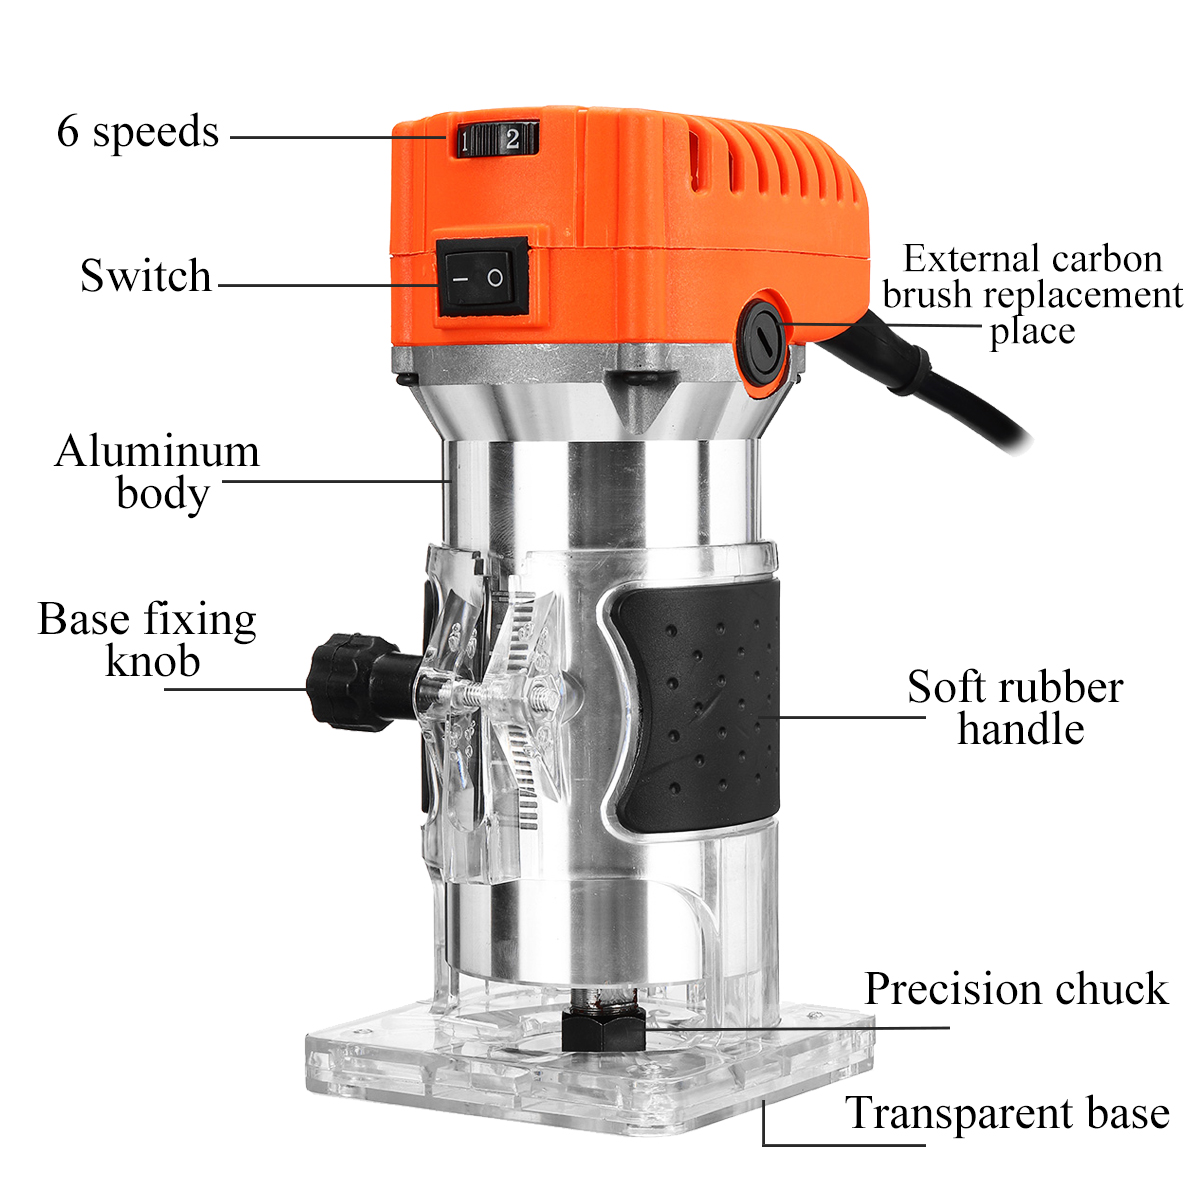 1280W-Wood-Palm-Router-Tool-Hand-Edge-Trimmer-WoodWorking-Joiner-Cutting-Palmming-Tool-6-Speeds-3500-1937521-3